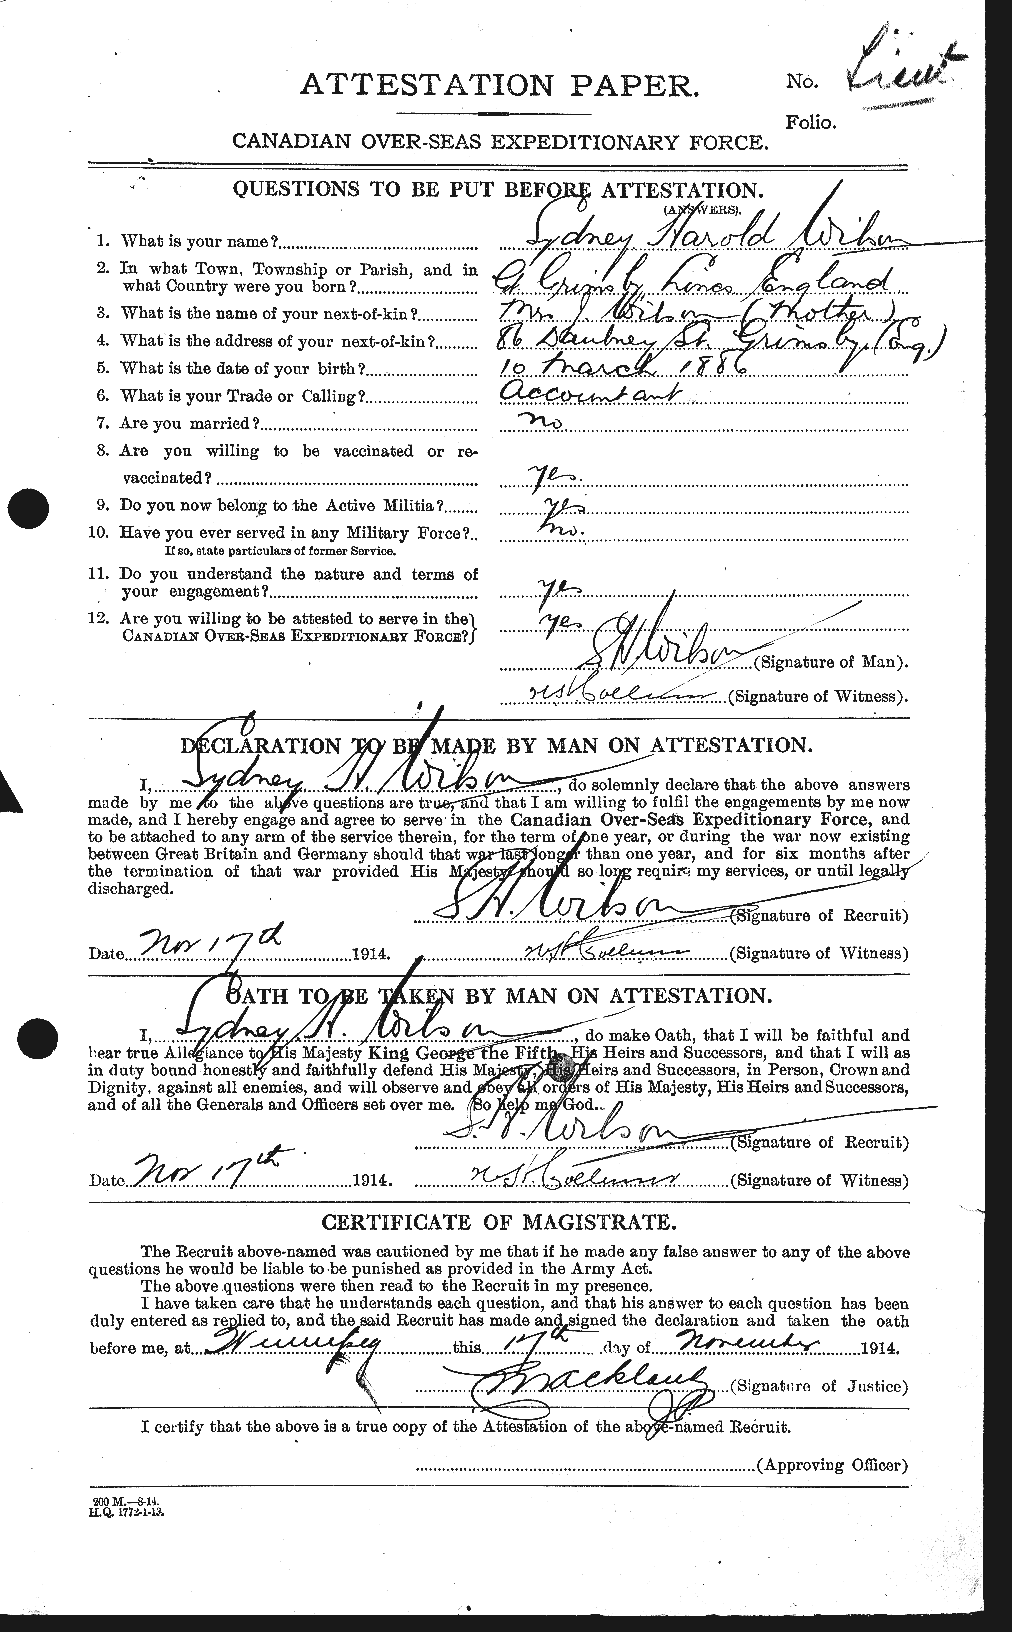 Personnel Records of the First World War - CEF 681161a